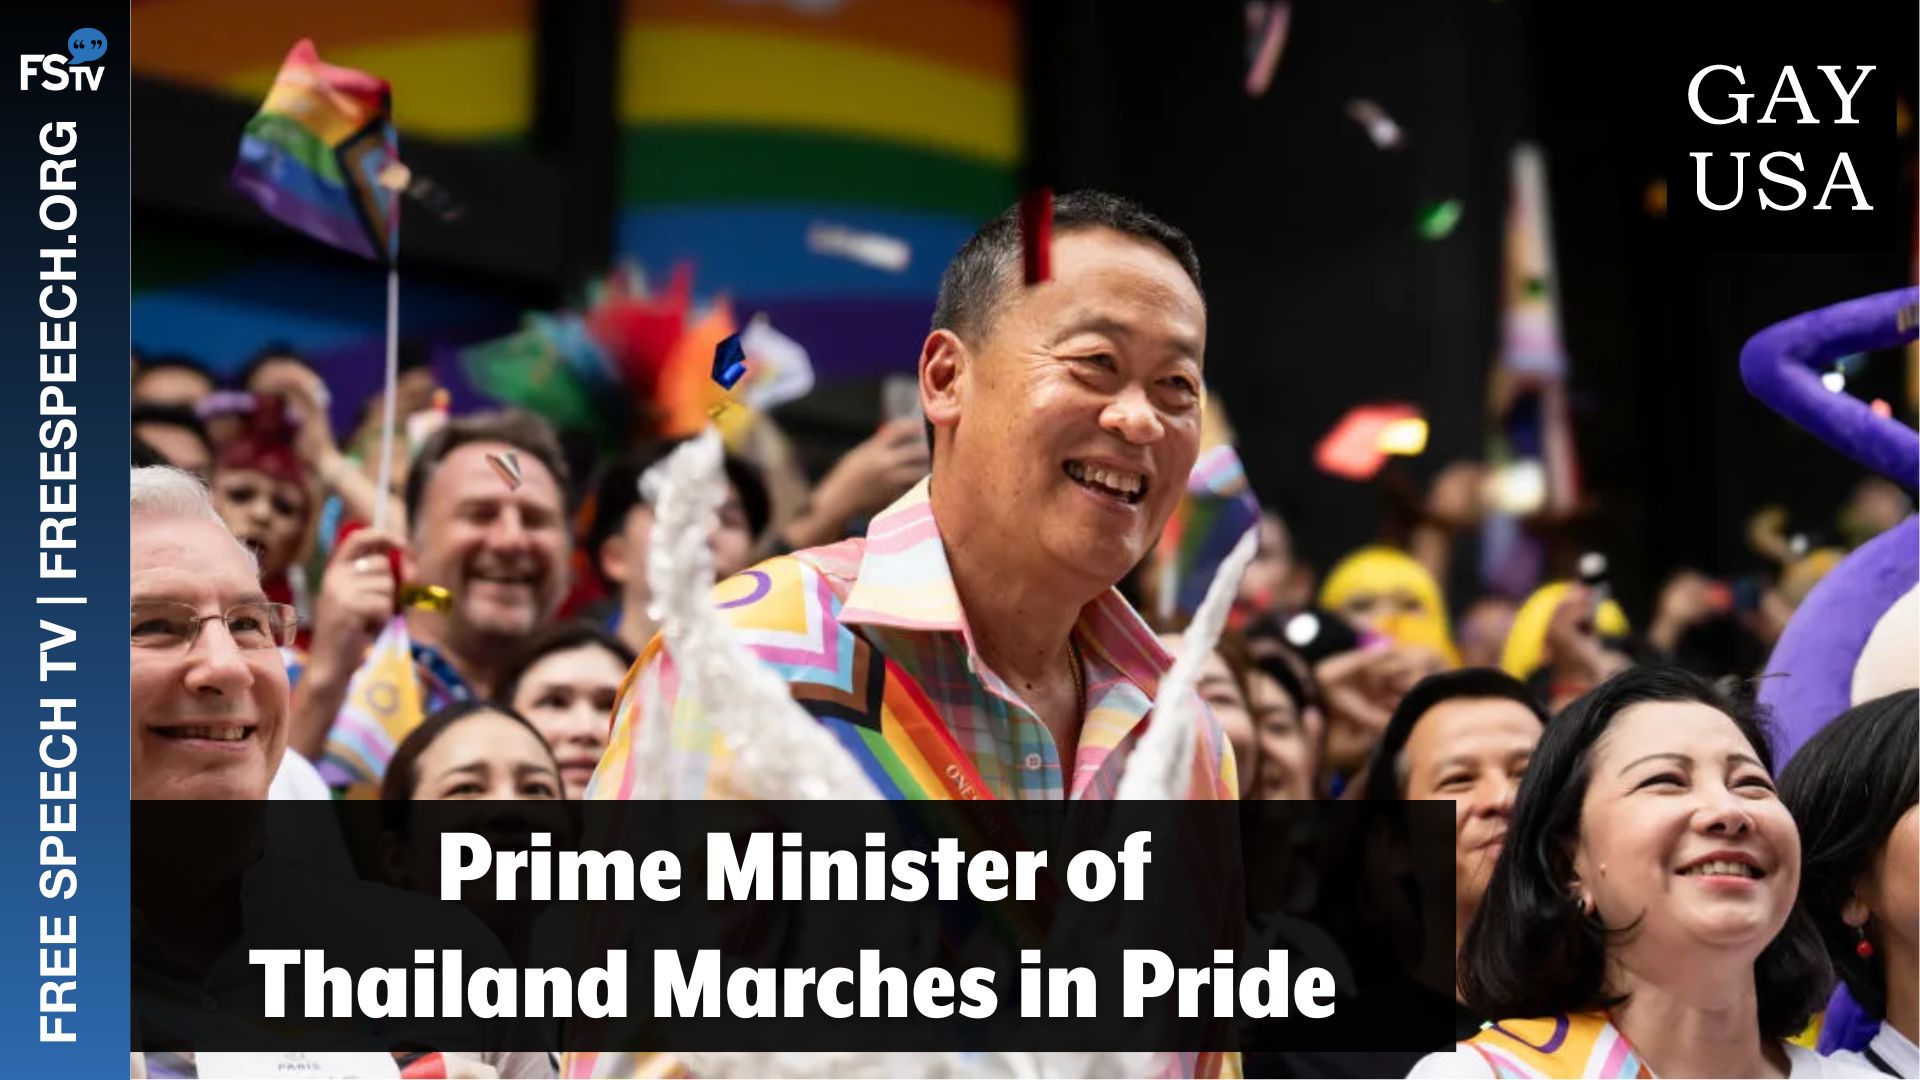 Gay USA | Prime Minister of Thailand Marches in Pride